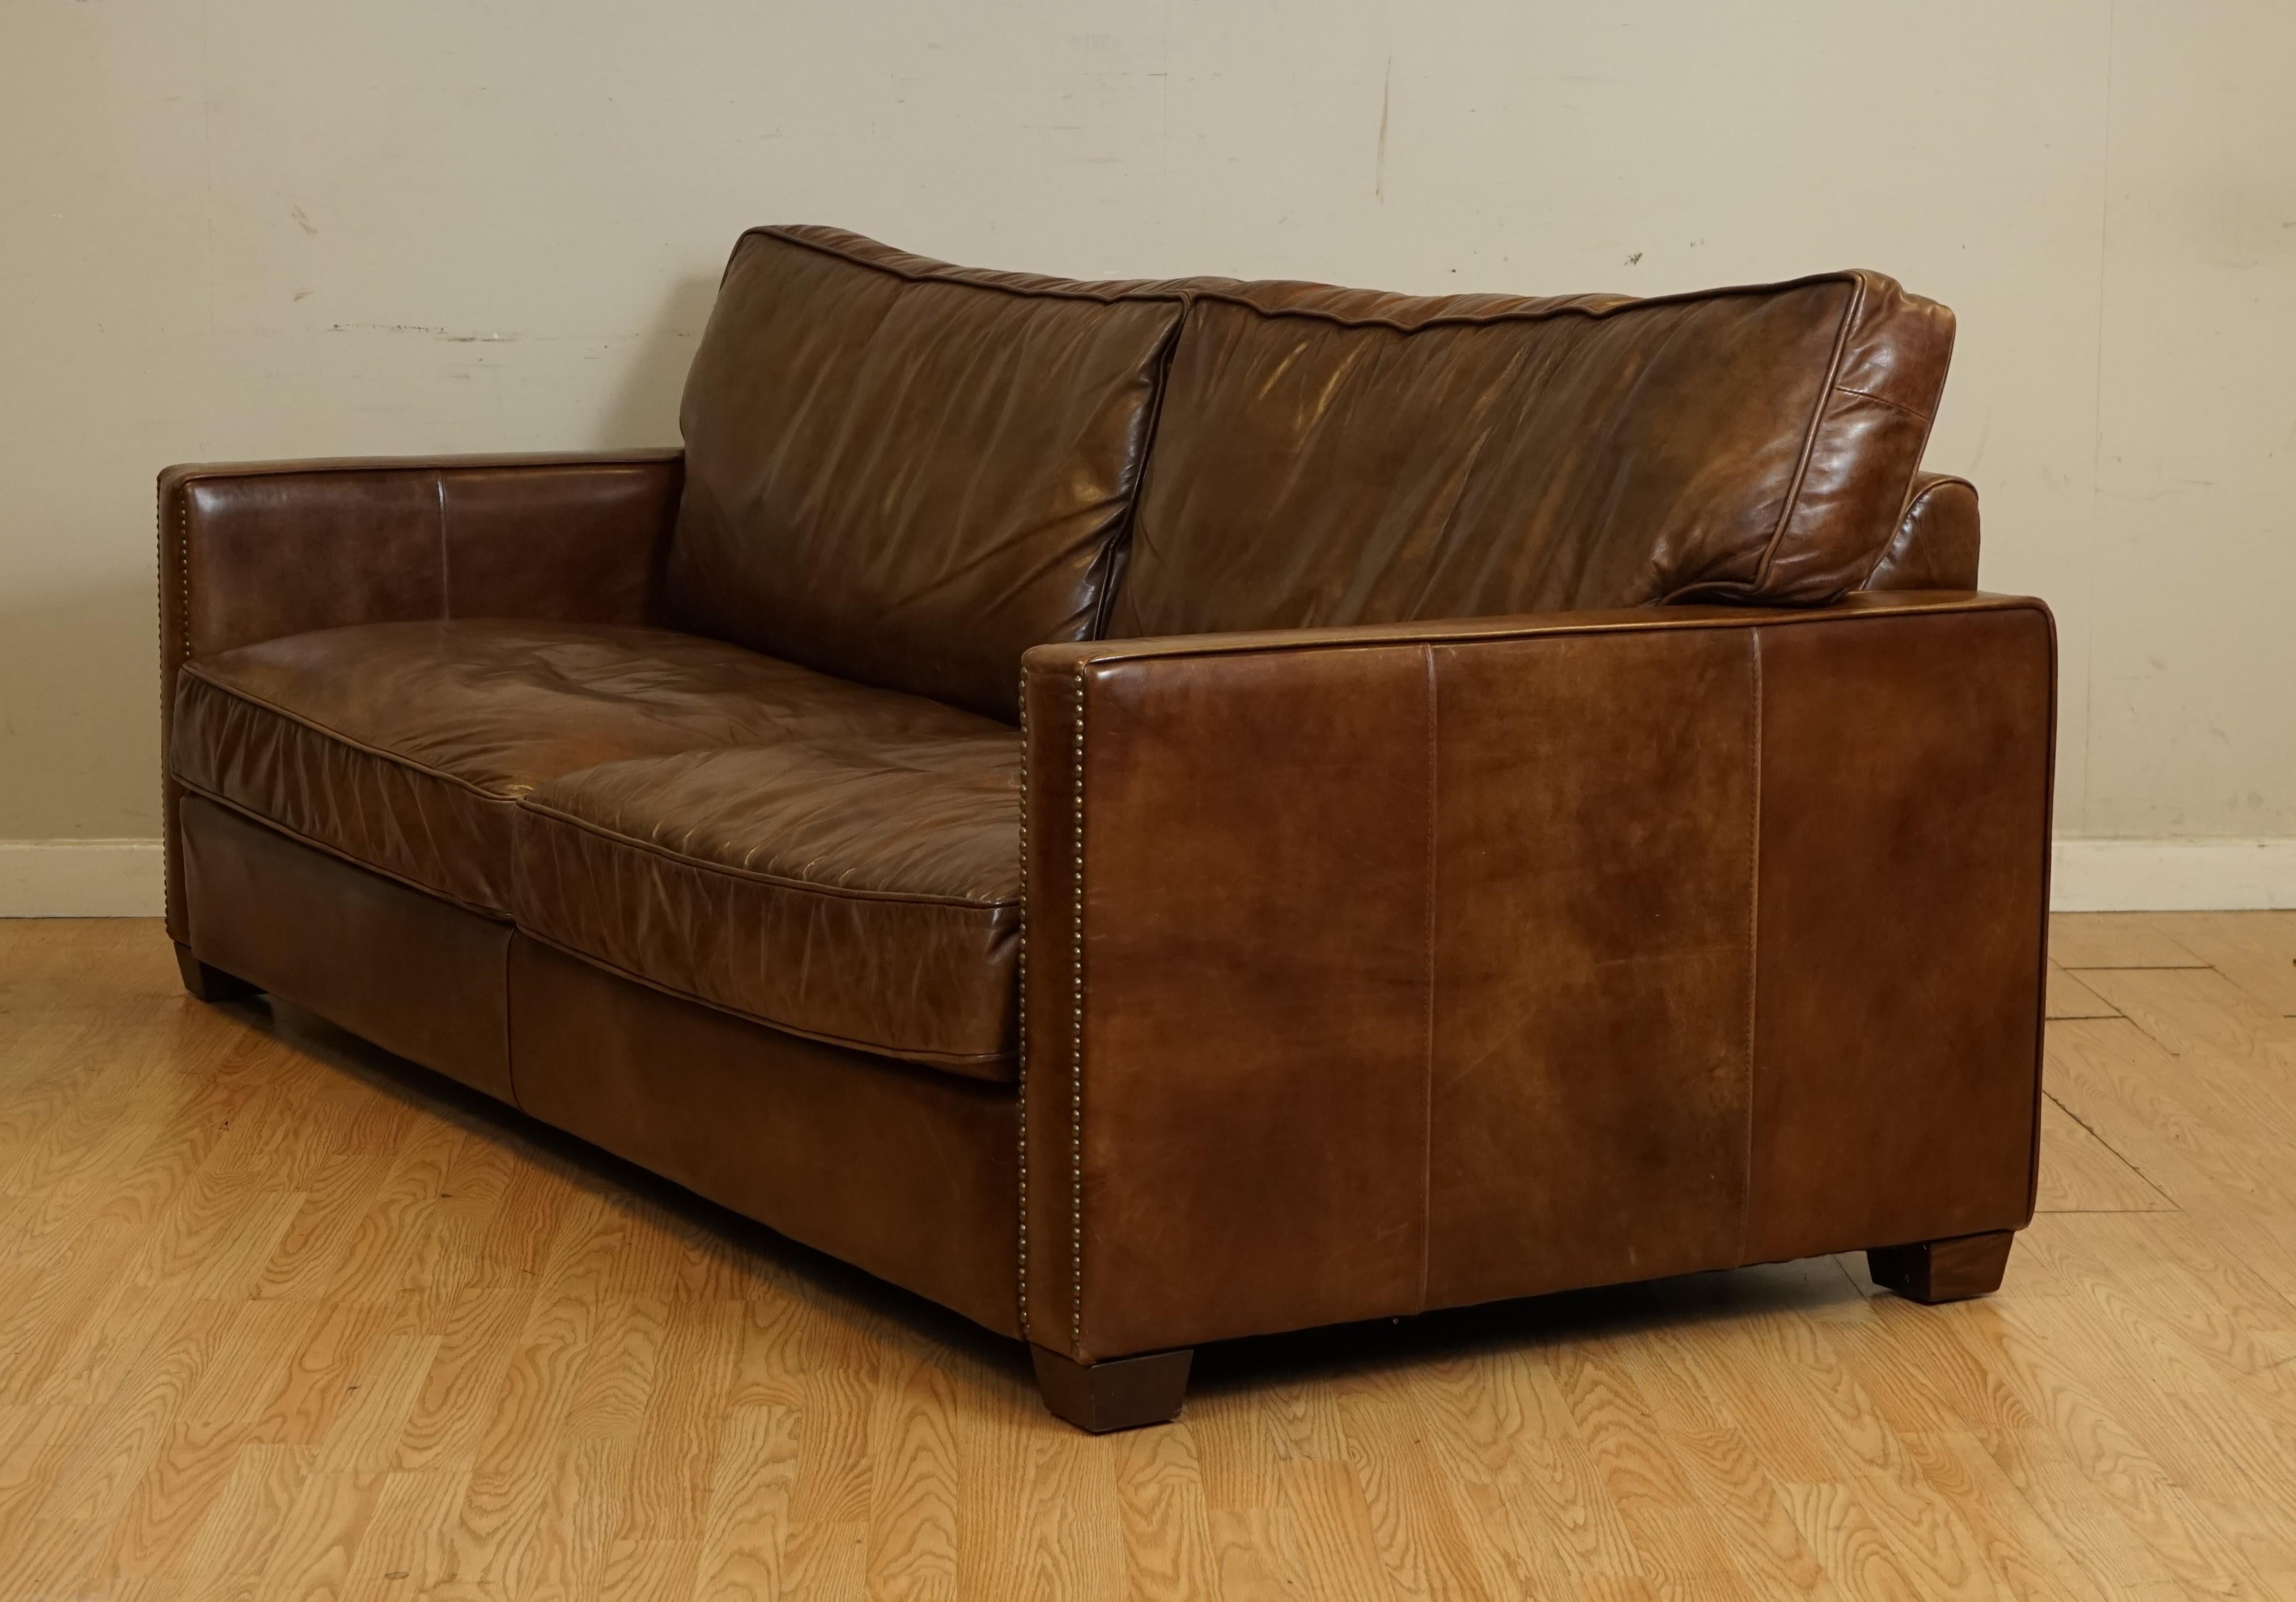 Gorgeous Timothy Oulton Viscount Old Sadle Nut Brown Leather Three Seater Sofa 4